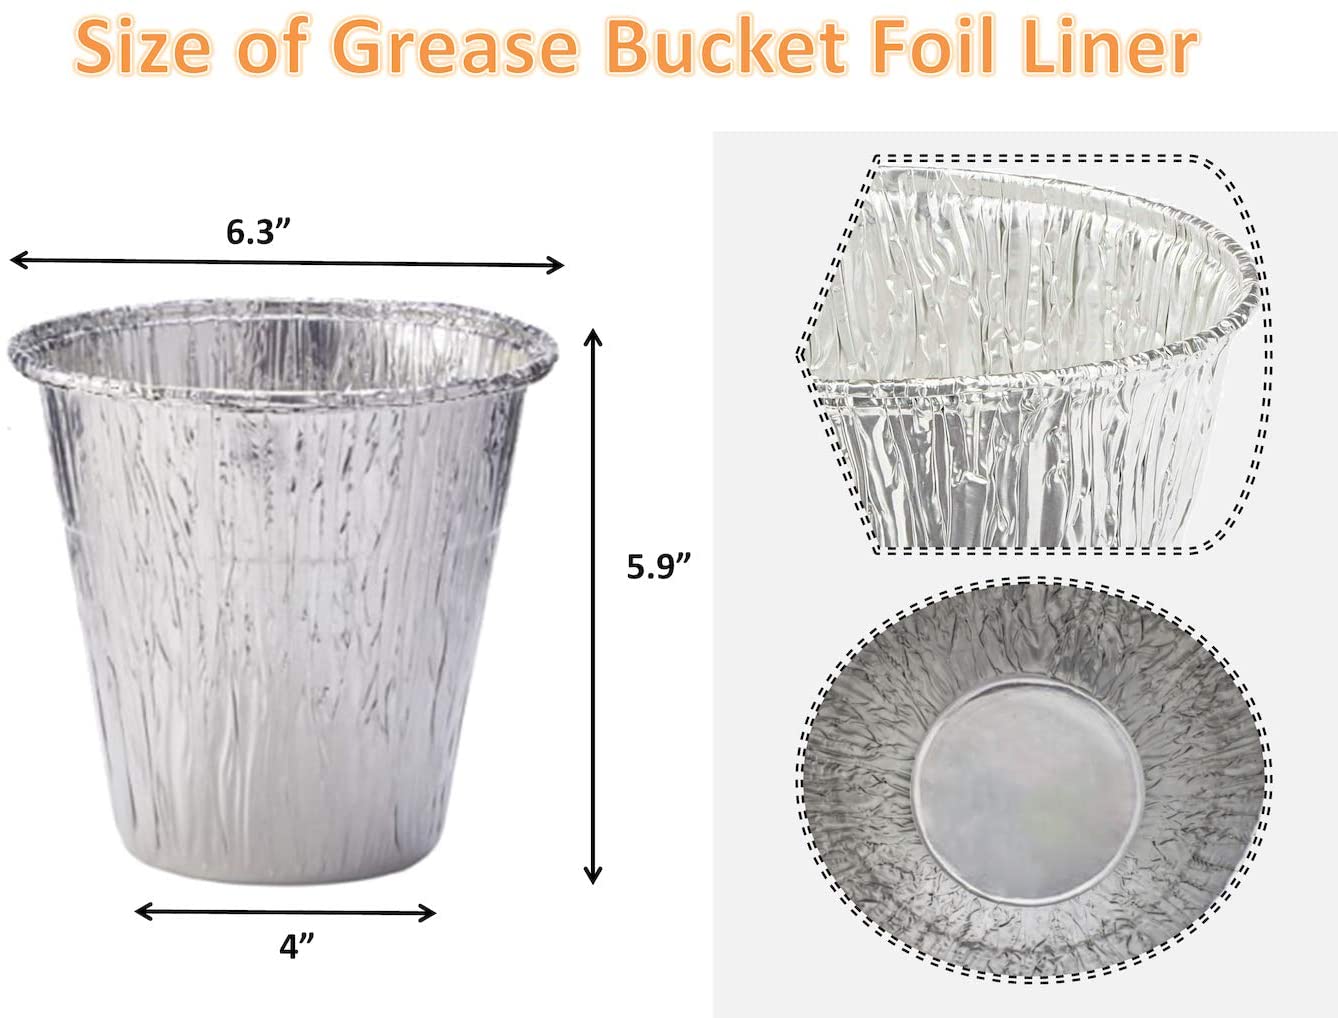 Meat Probe & Disposable Aluminum Foil Grease Bucket Liners Replacement Part for Pit Boss Wood Pellet Grill